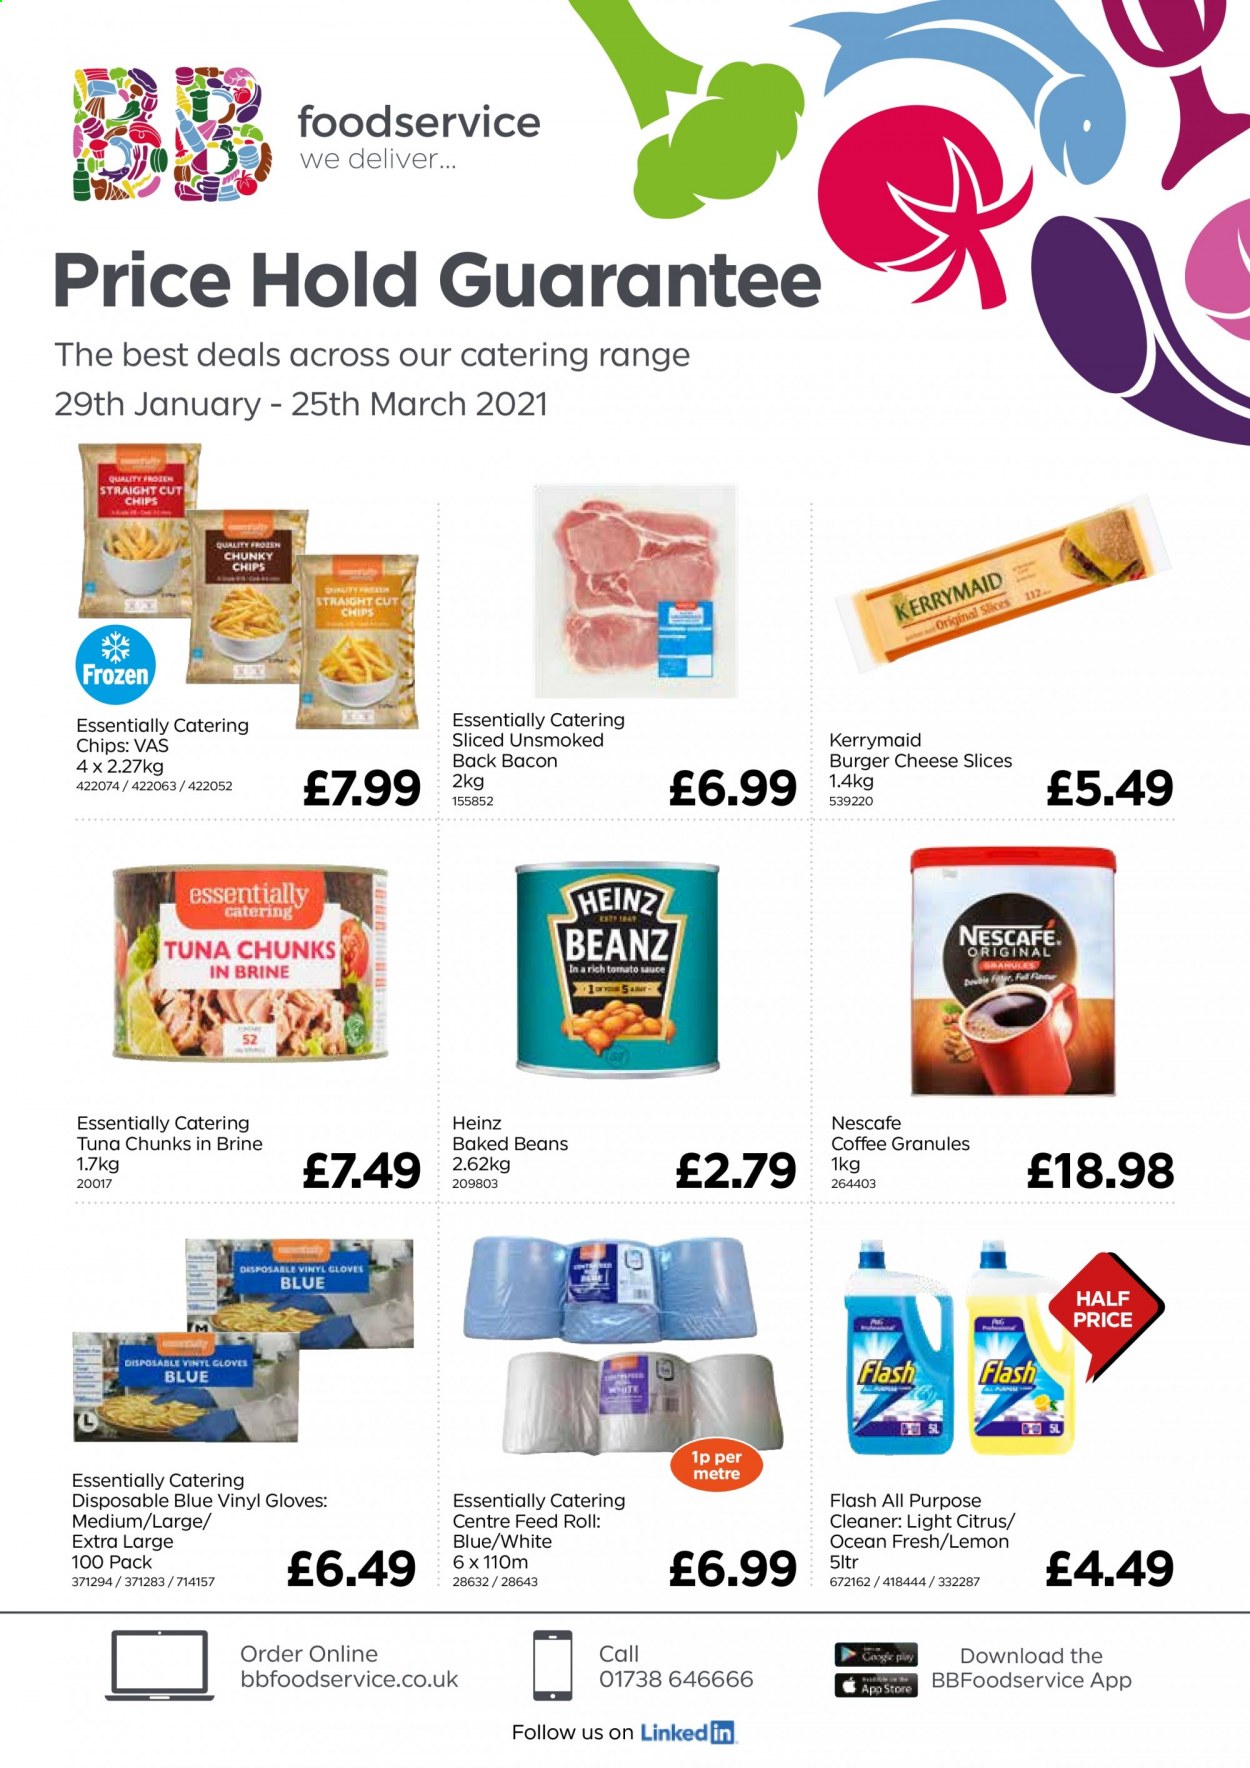 thumbnail - Bestway offer  - 29/01/2021 - 25/03/2021 - Sales products - beans, hamburger, tuna, sauce, bacon, sliced cheese, cheese, Heinz, baked beans, tomato sauce, coffee, Nescafé, cleaner, all purpose cleaner. Page 1.